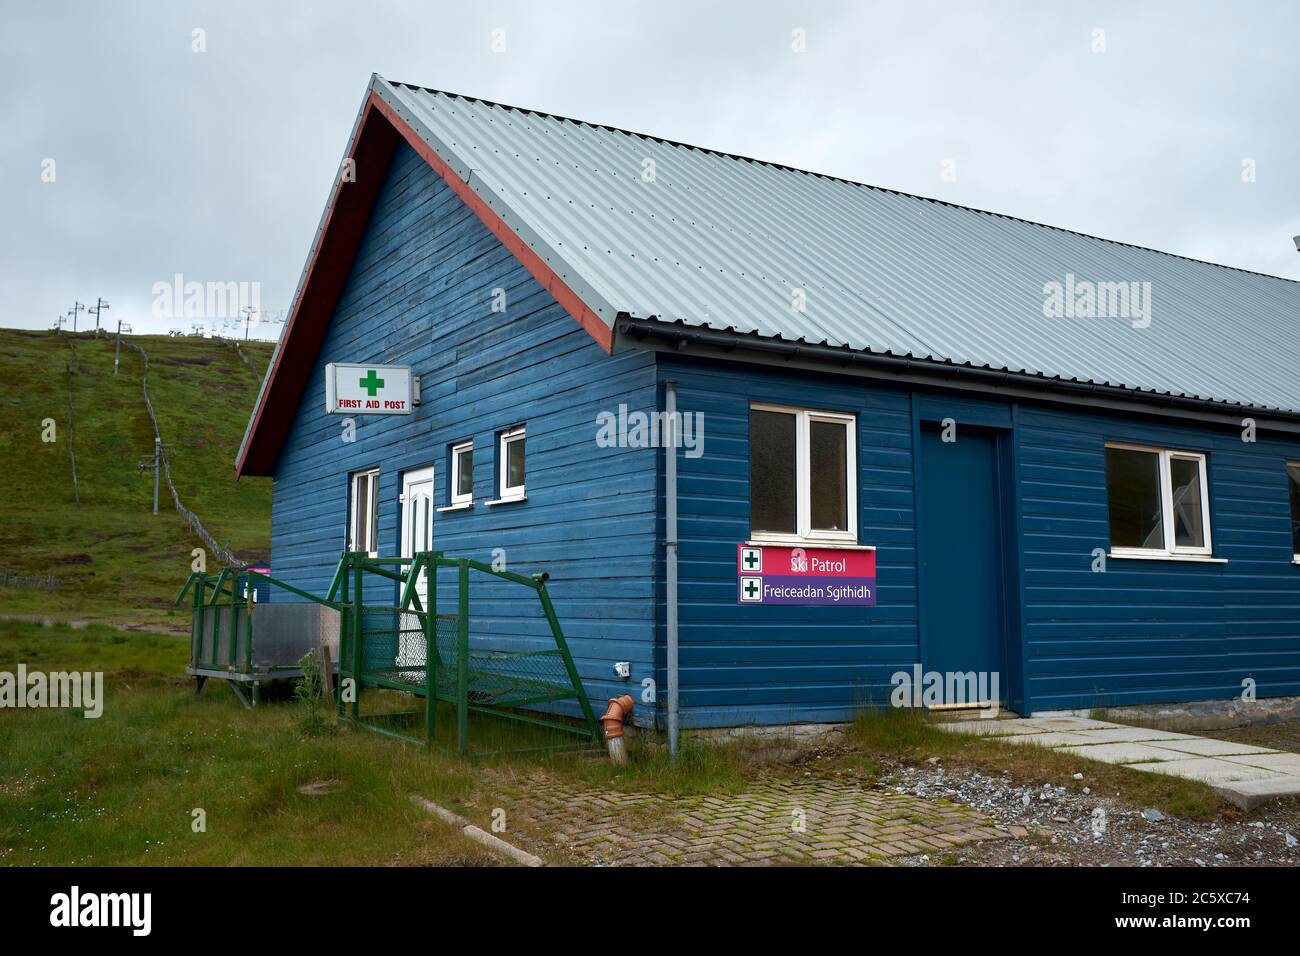 Waiting for winter, during a rainy July and out of season, the Ski Patrol and First Aid Centre is closed at the Lecht Ski Centre Stock Photo